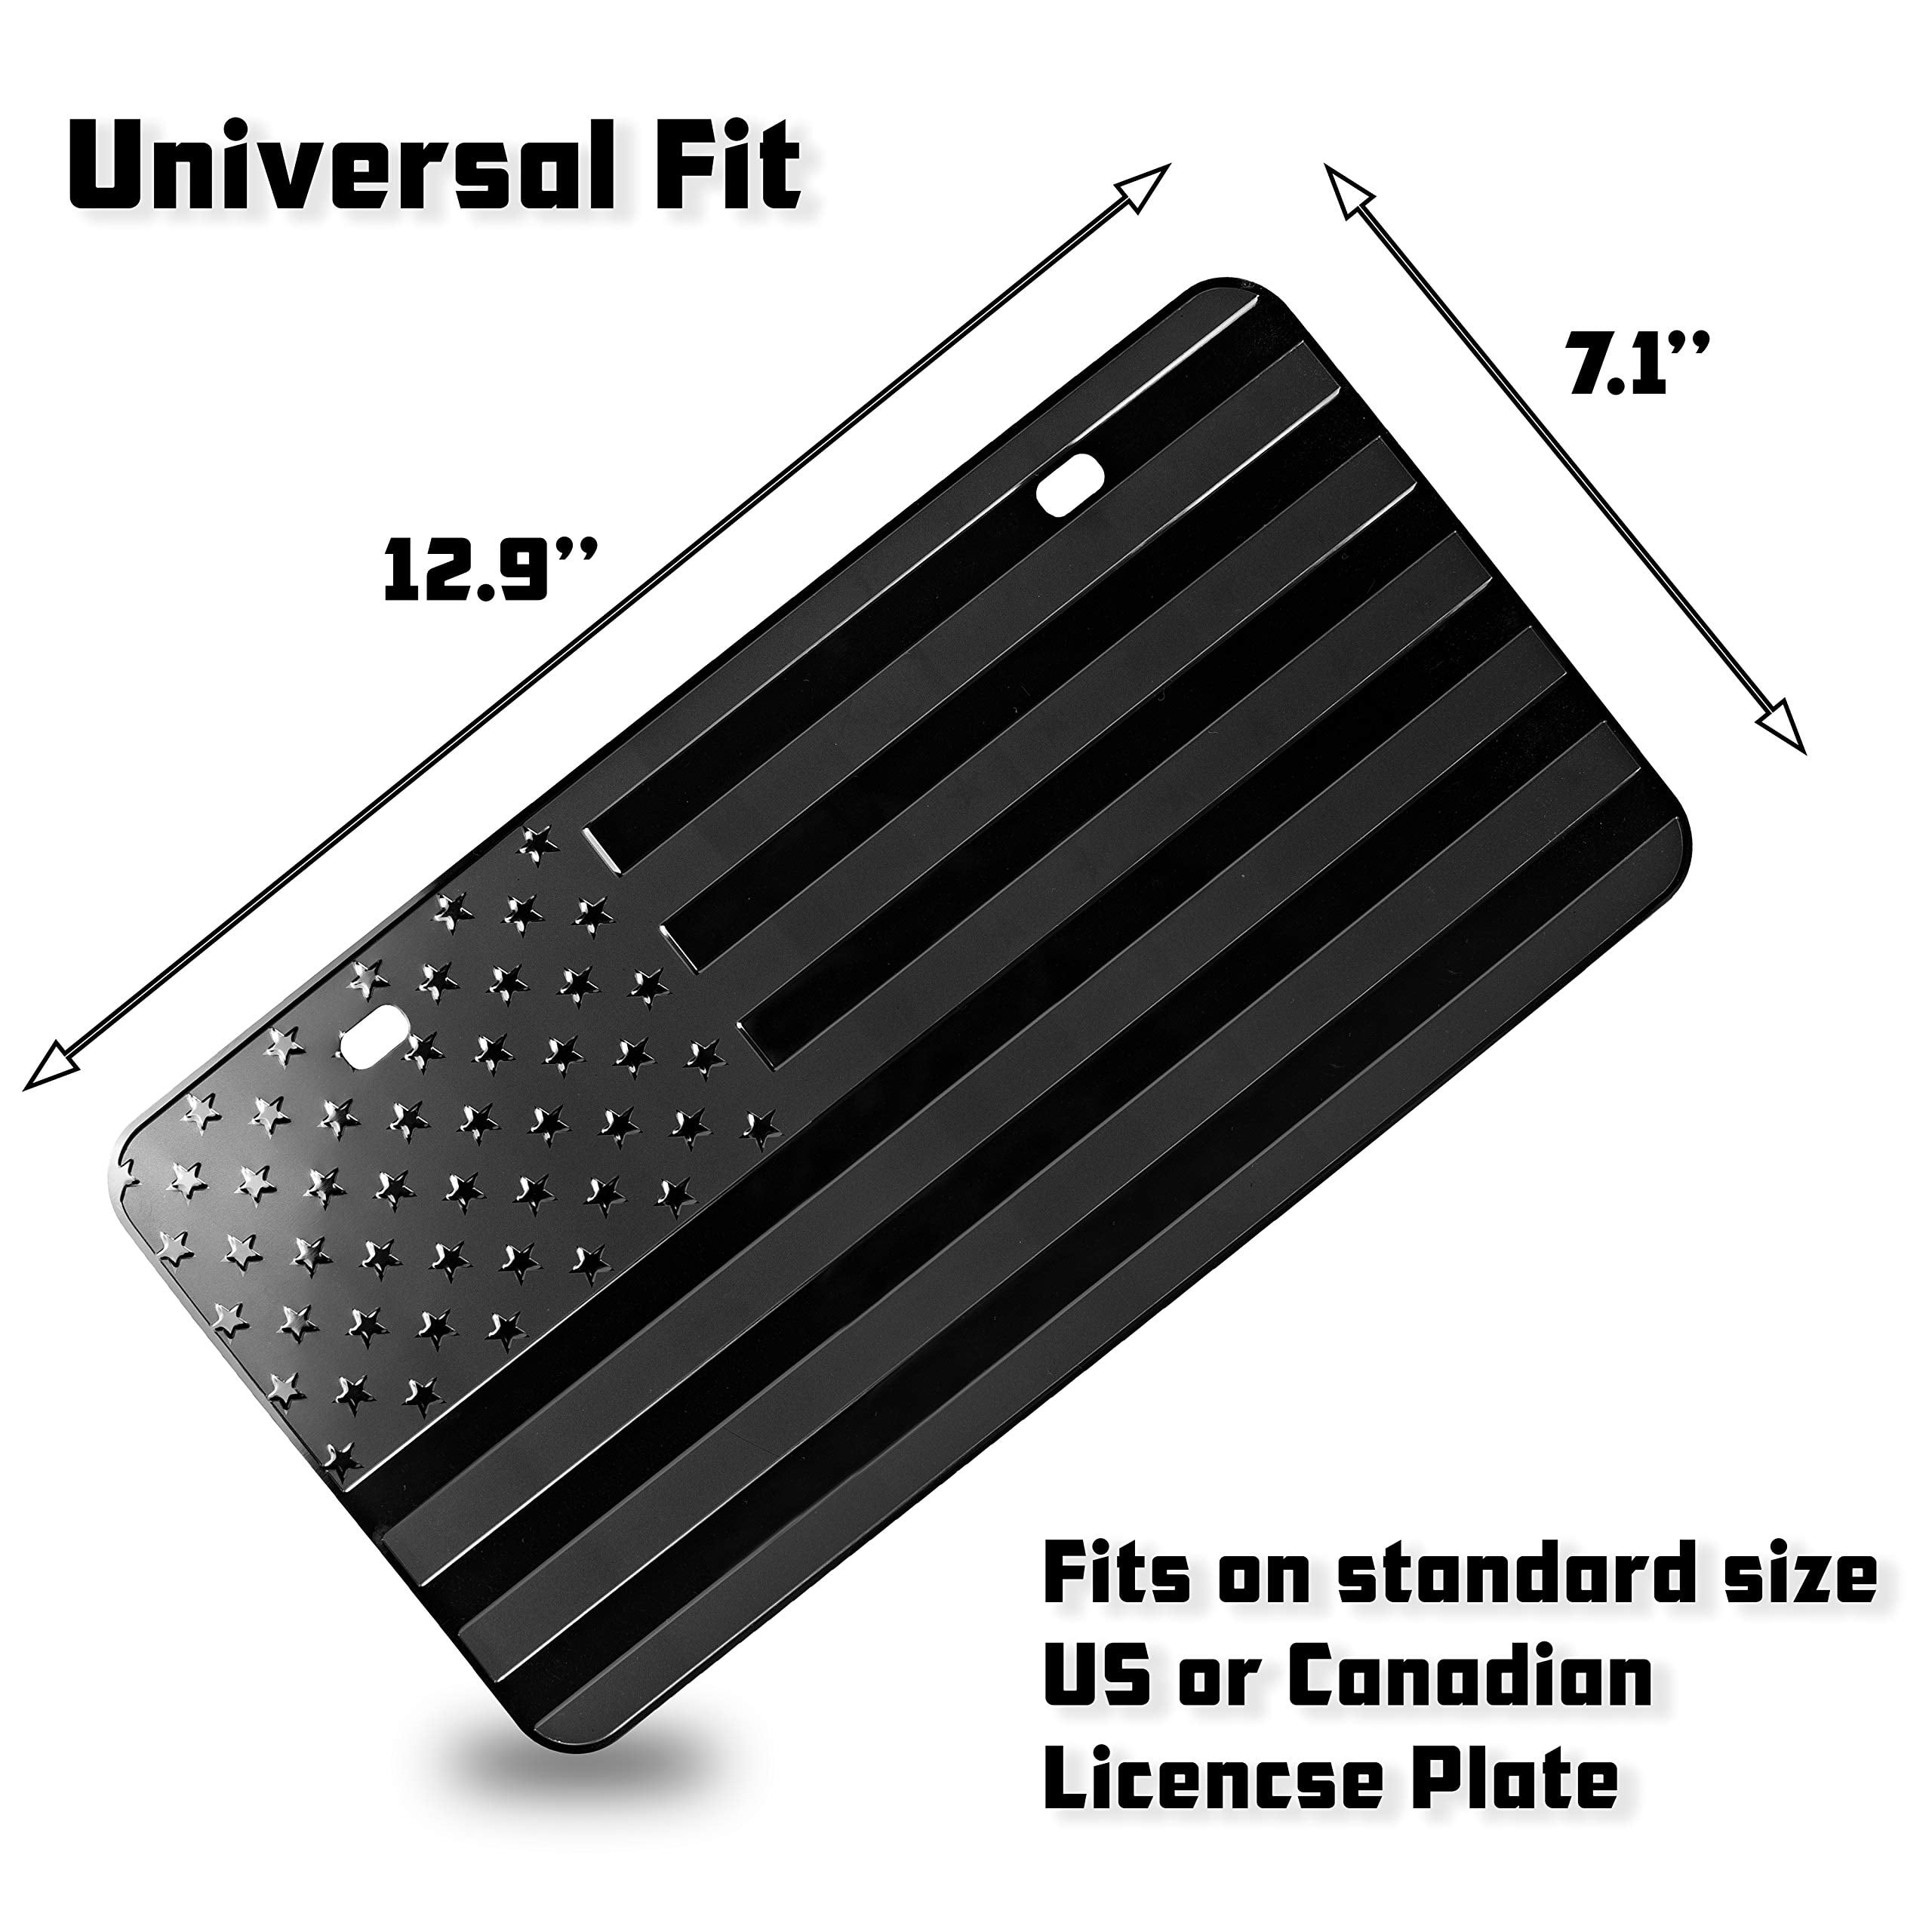 Zento Deals American Flag USA Monochrome License Plate Patriotic Novelty Premium Quality Durable Black Metal Embossed USA Flag Waterproof and Dustproof Plate 